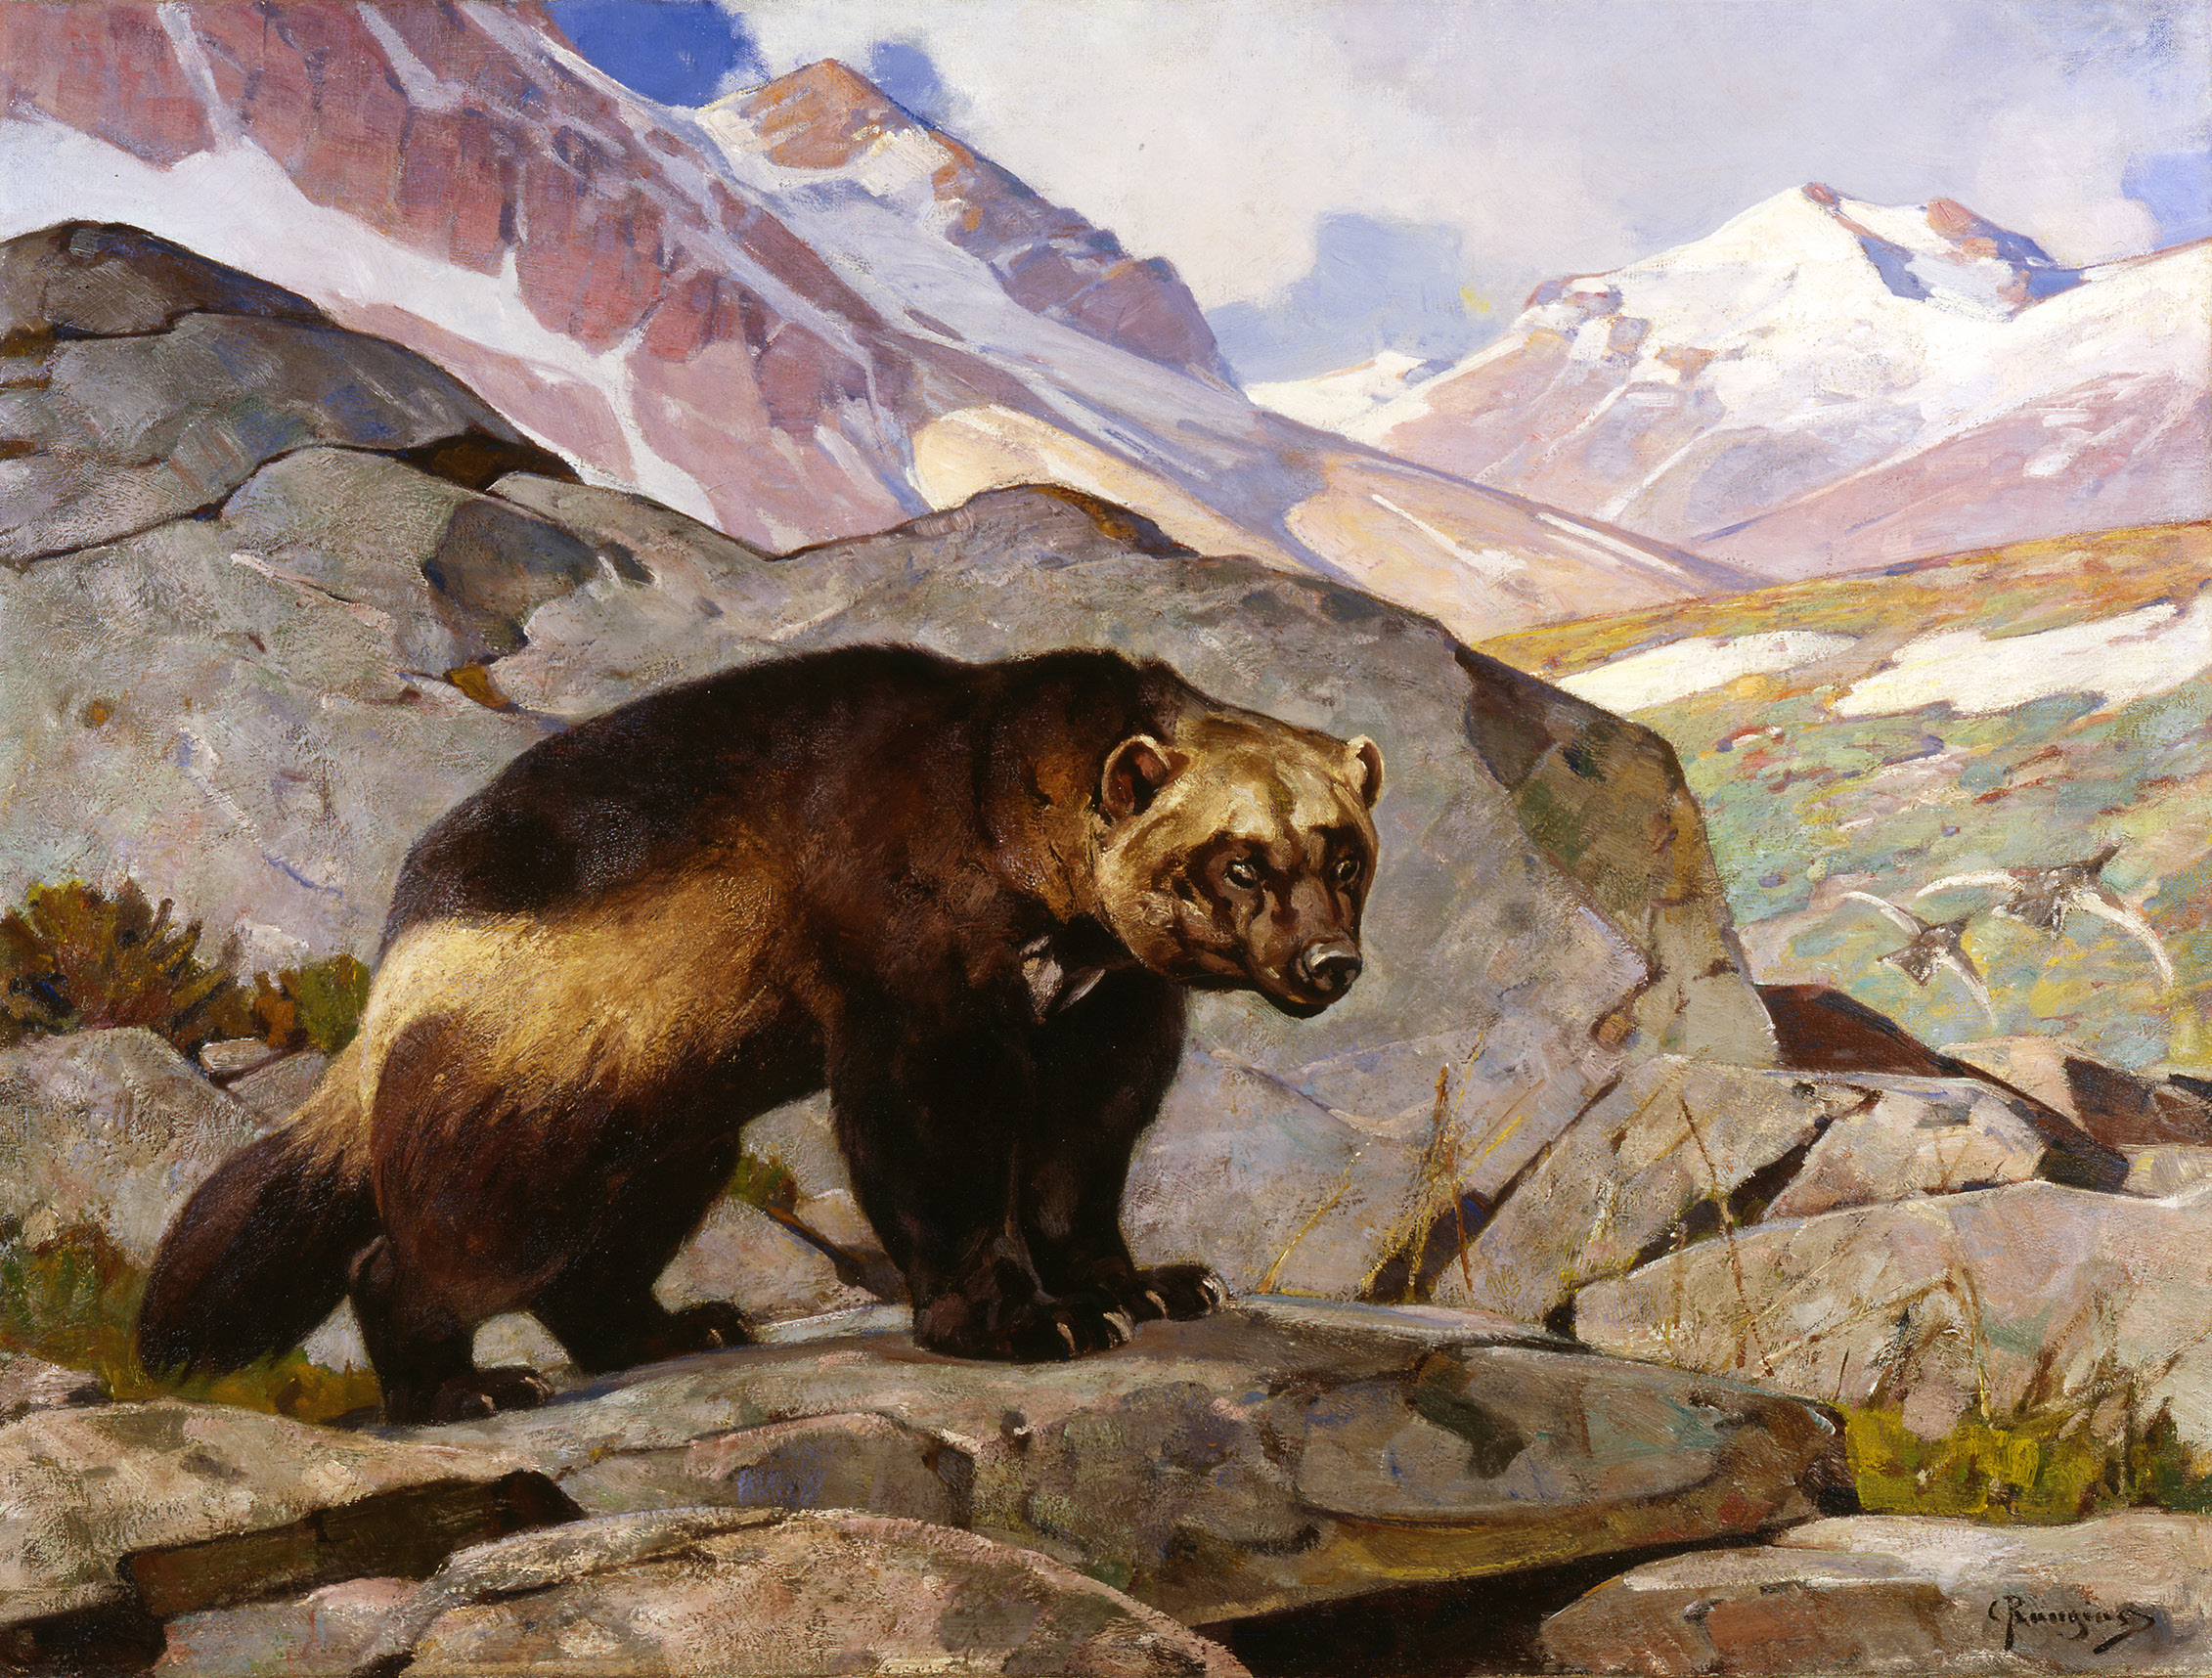 Wolverine in a Rocky Mountain Landscape, Alberta, 1919. Carl Rungius. Oil on canvas, 34 x 44 inches. Buffalo Bill Center of the West, Cody, WY. Gift of Jackson Hole Preserve, Inc. 16.93.3